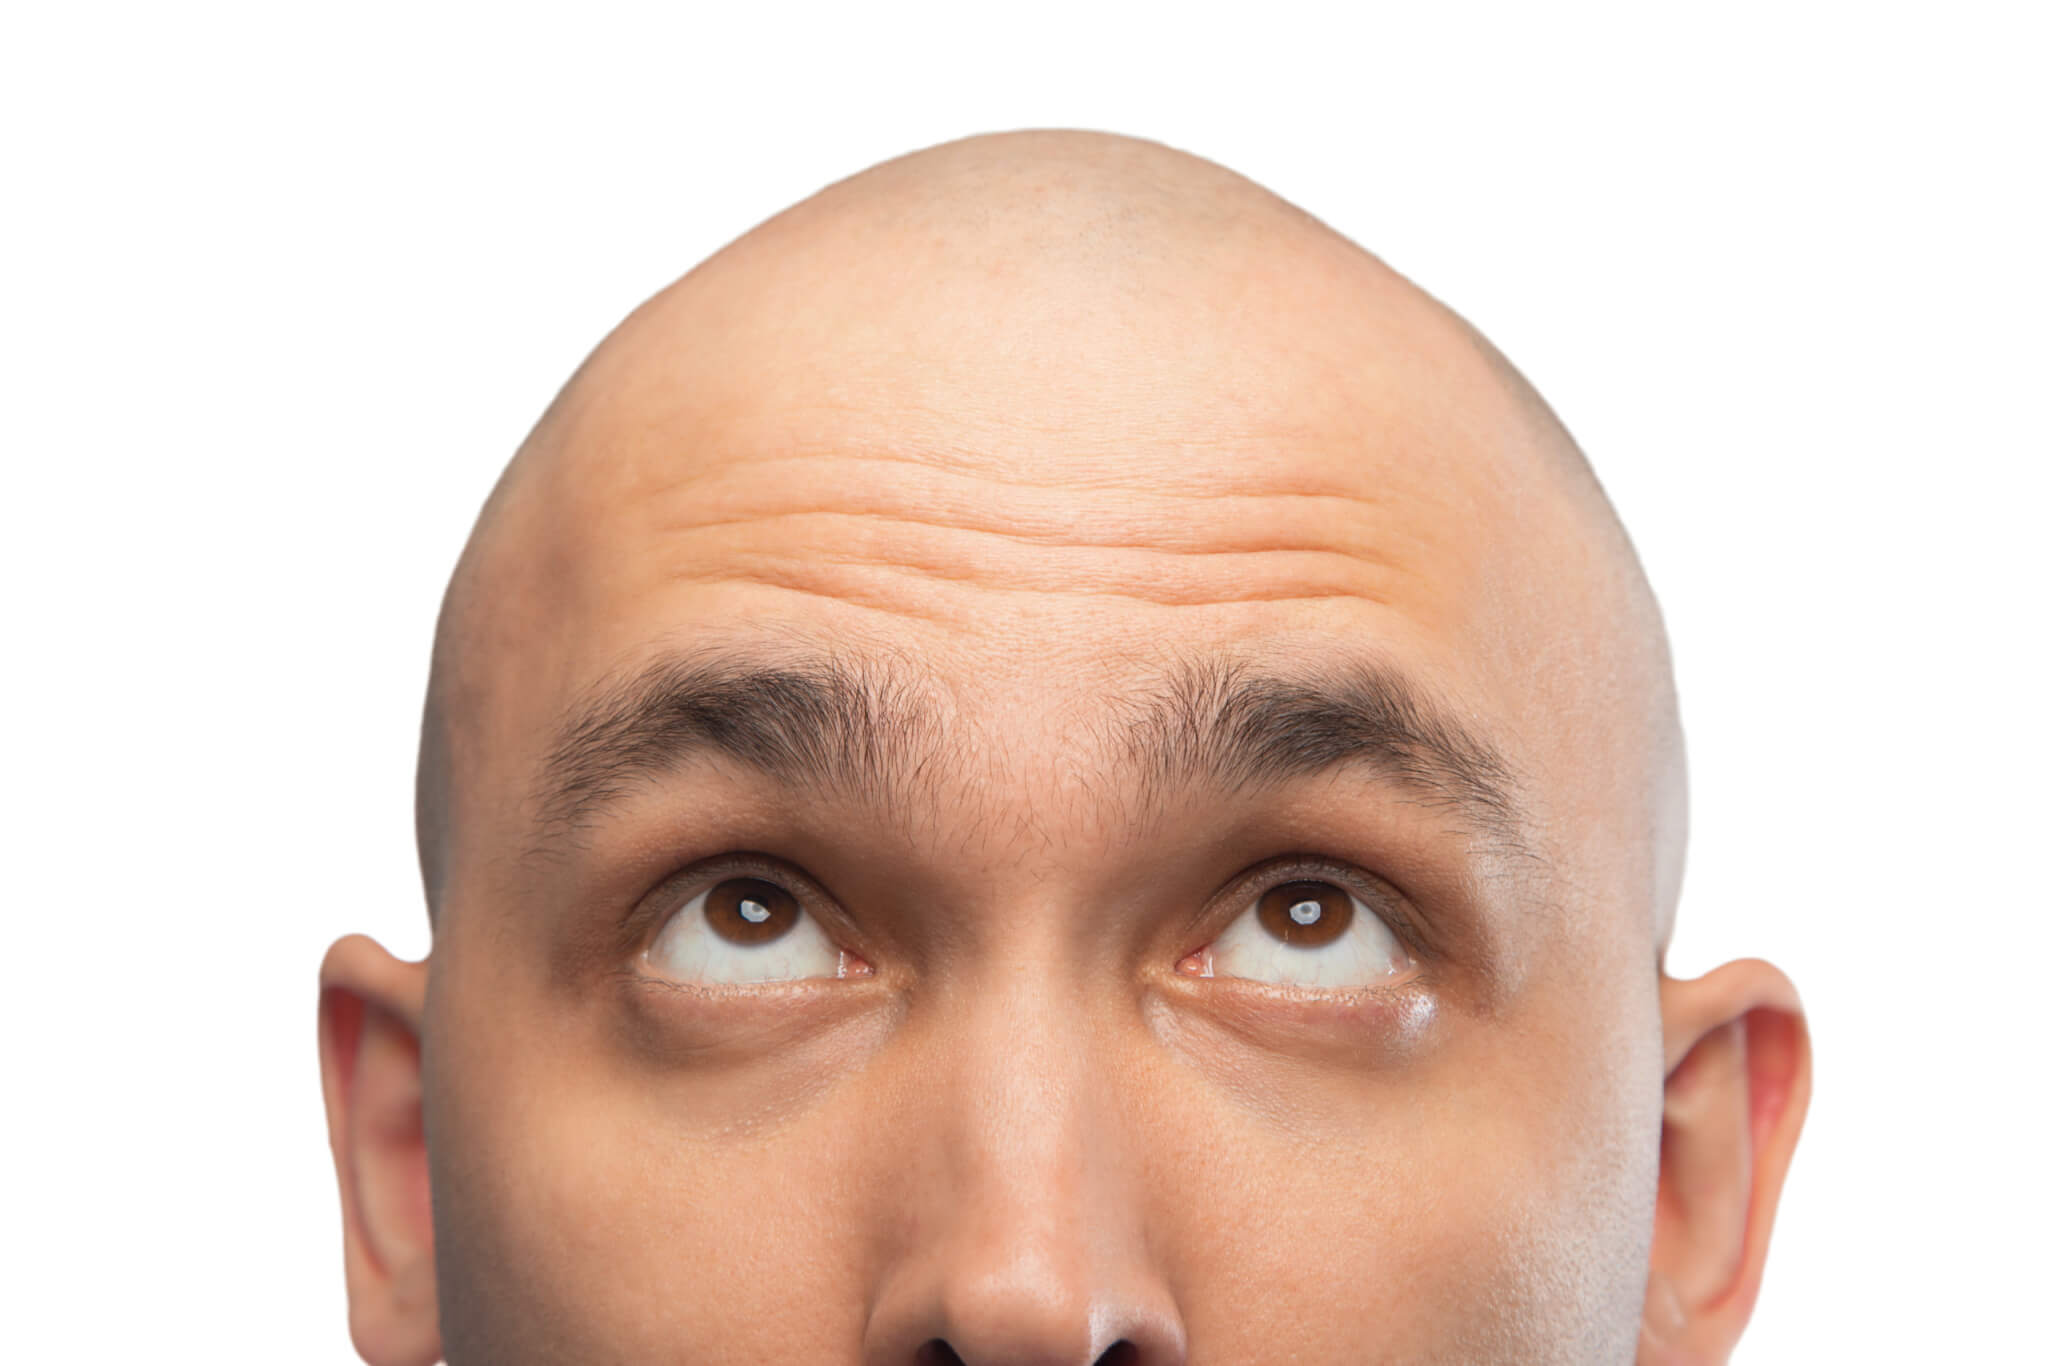 Baldness cure on horizon? Harvard scientists discover protein that fuels hair growth